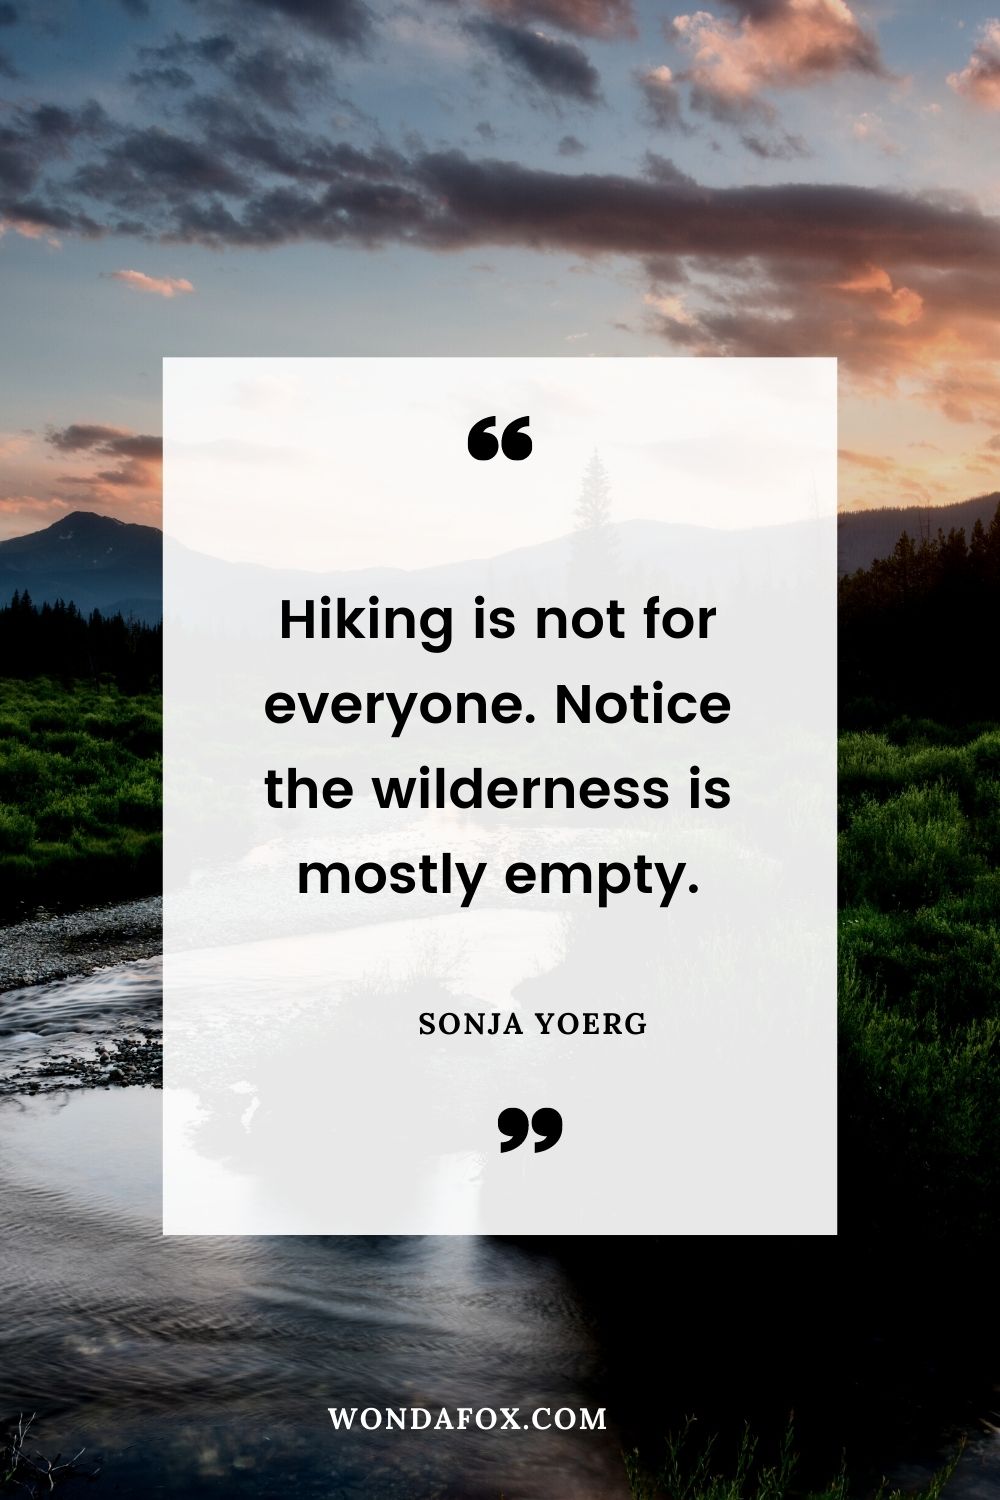 Hiking is not for everyone. Notice the wilderness is mostly empty.